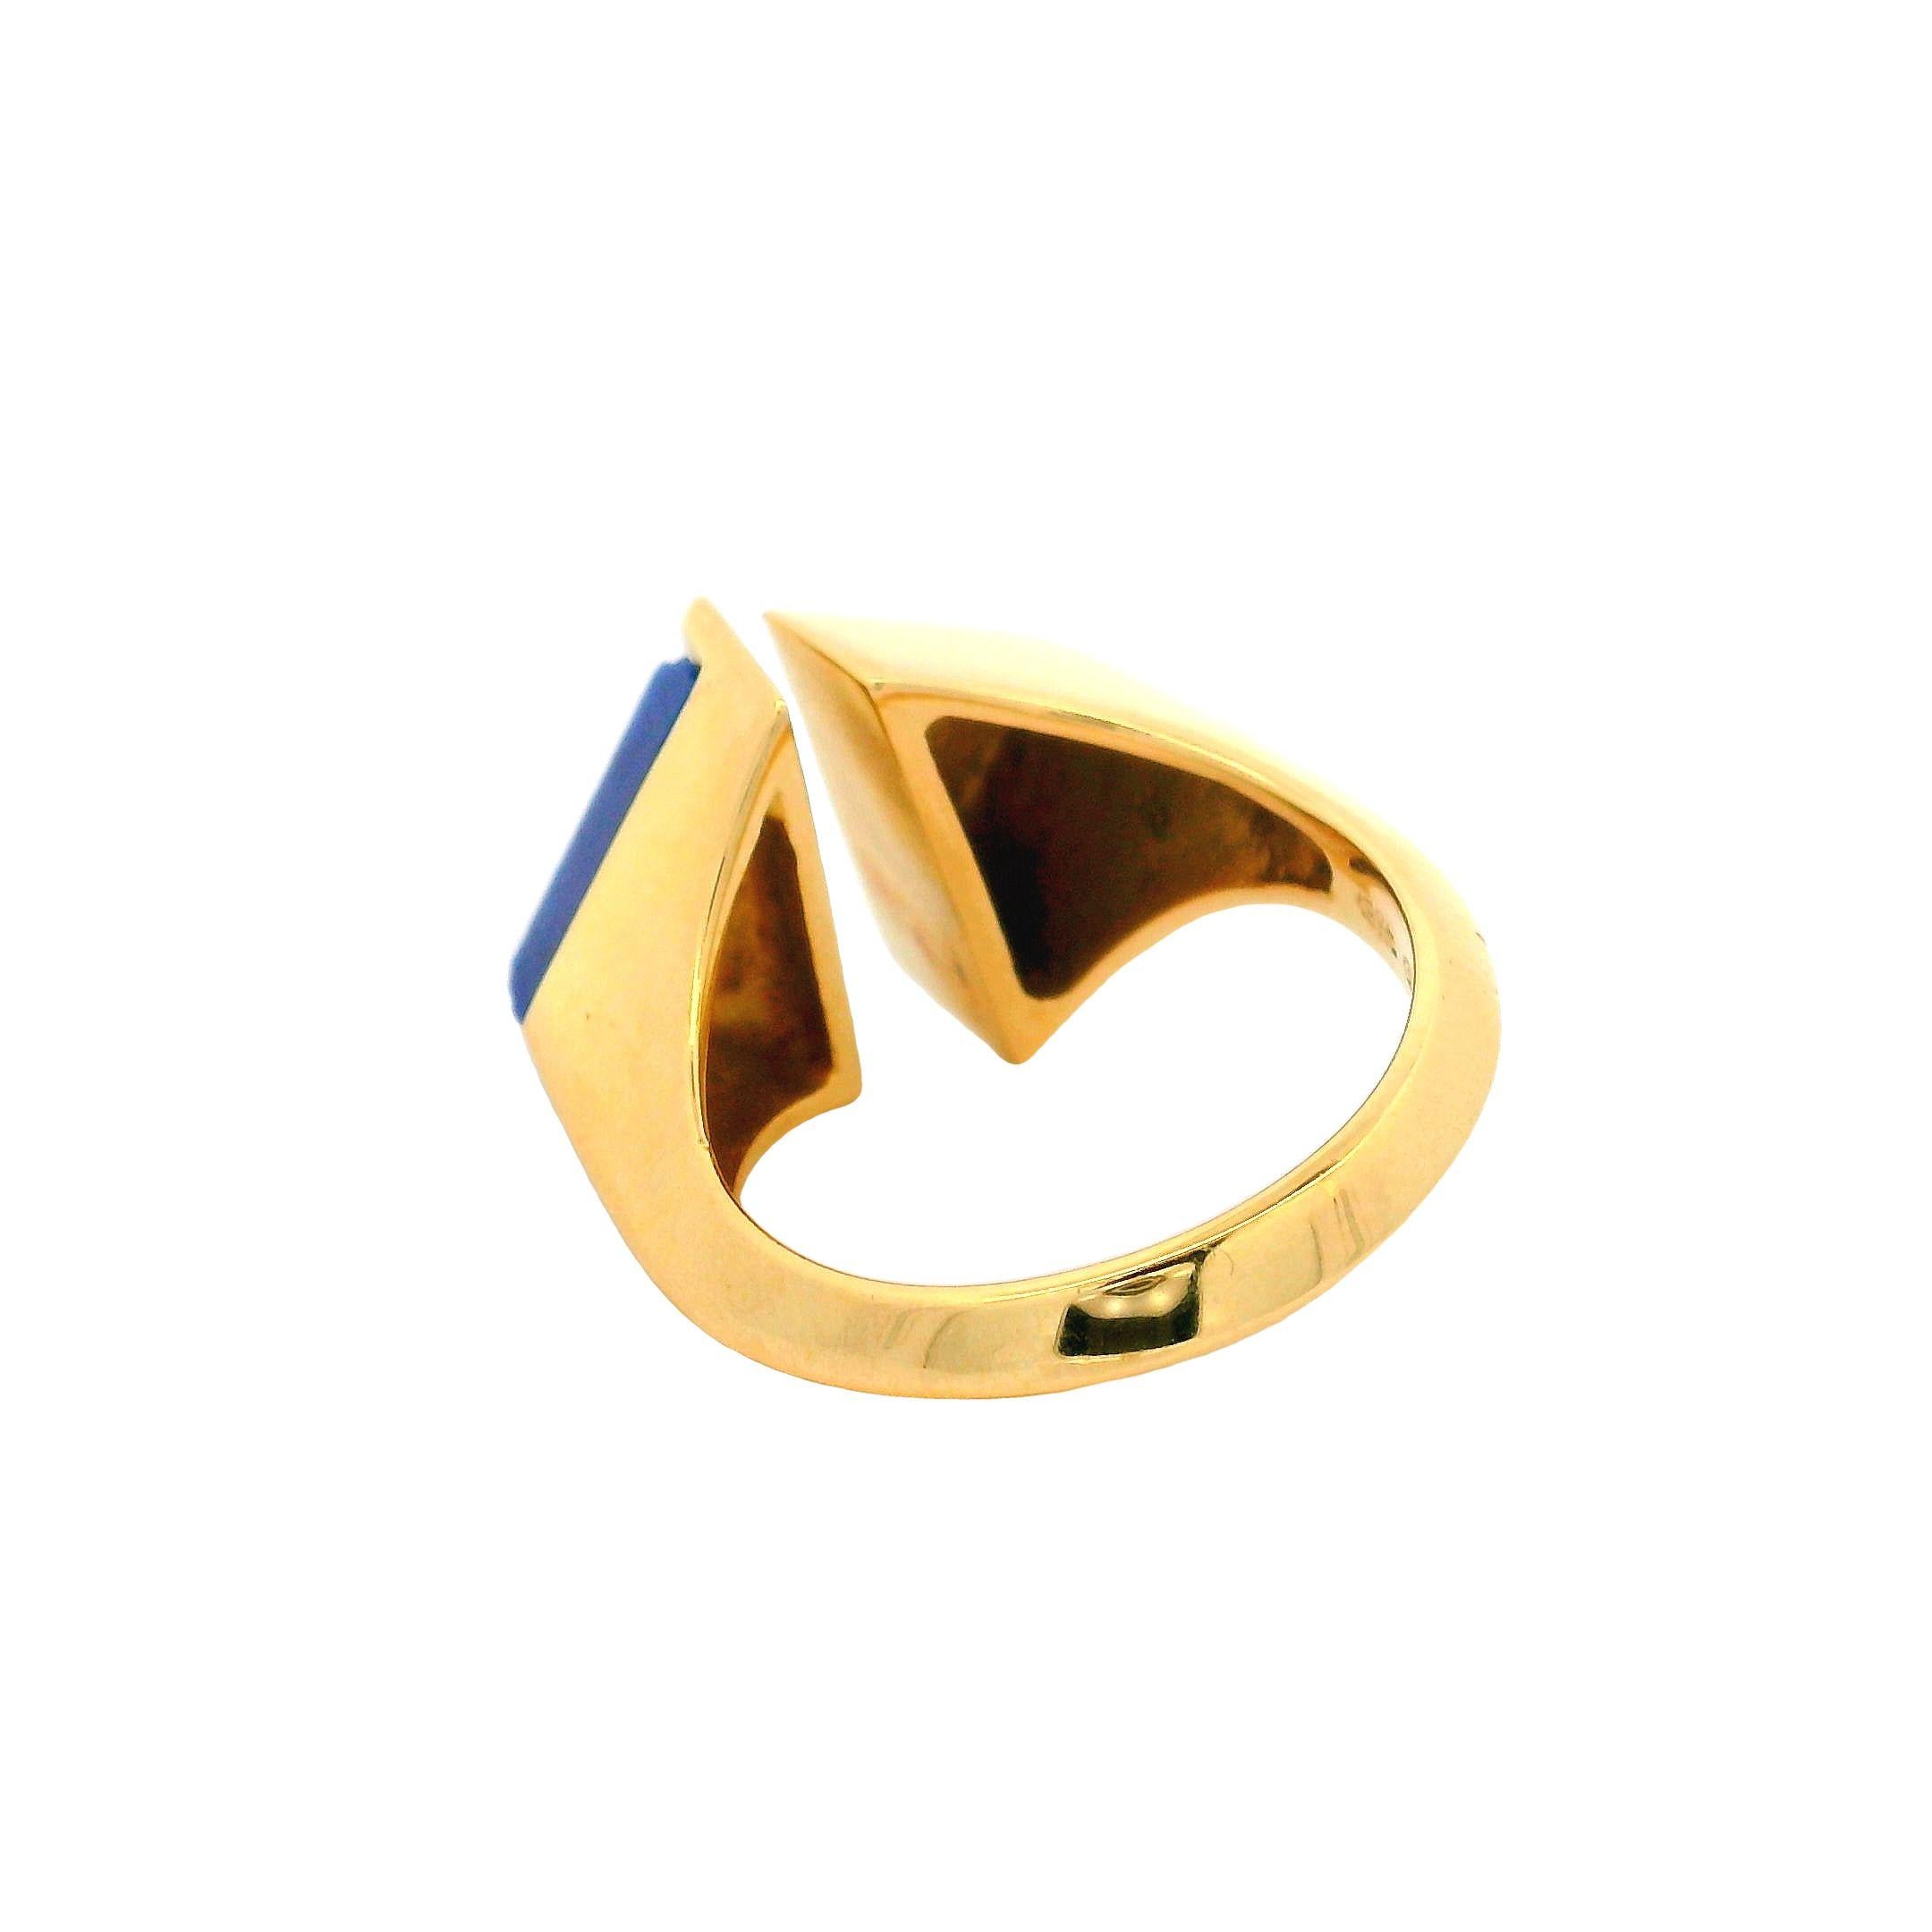 Modernist 18k Yellow Gold Blue Lapis Geometric Triangular Bypass Tension Ring In Excellent Condition For Sale In Montclair, NJ